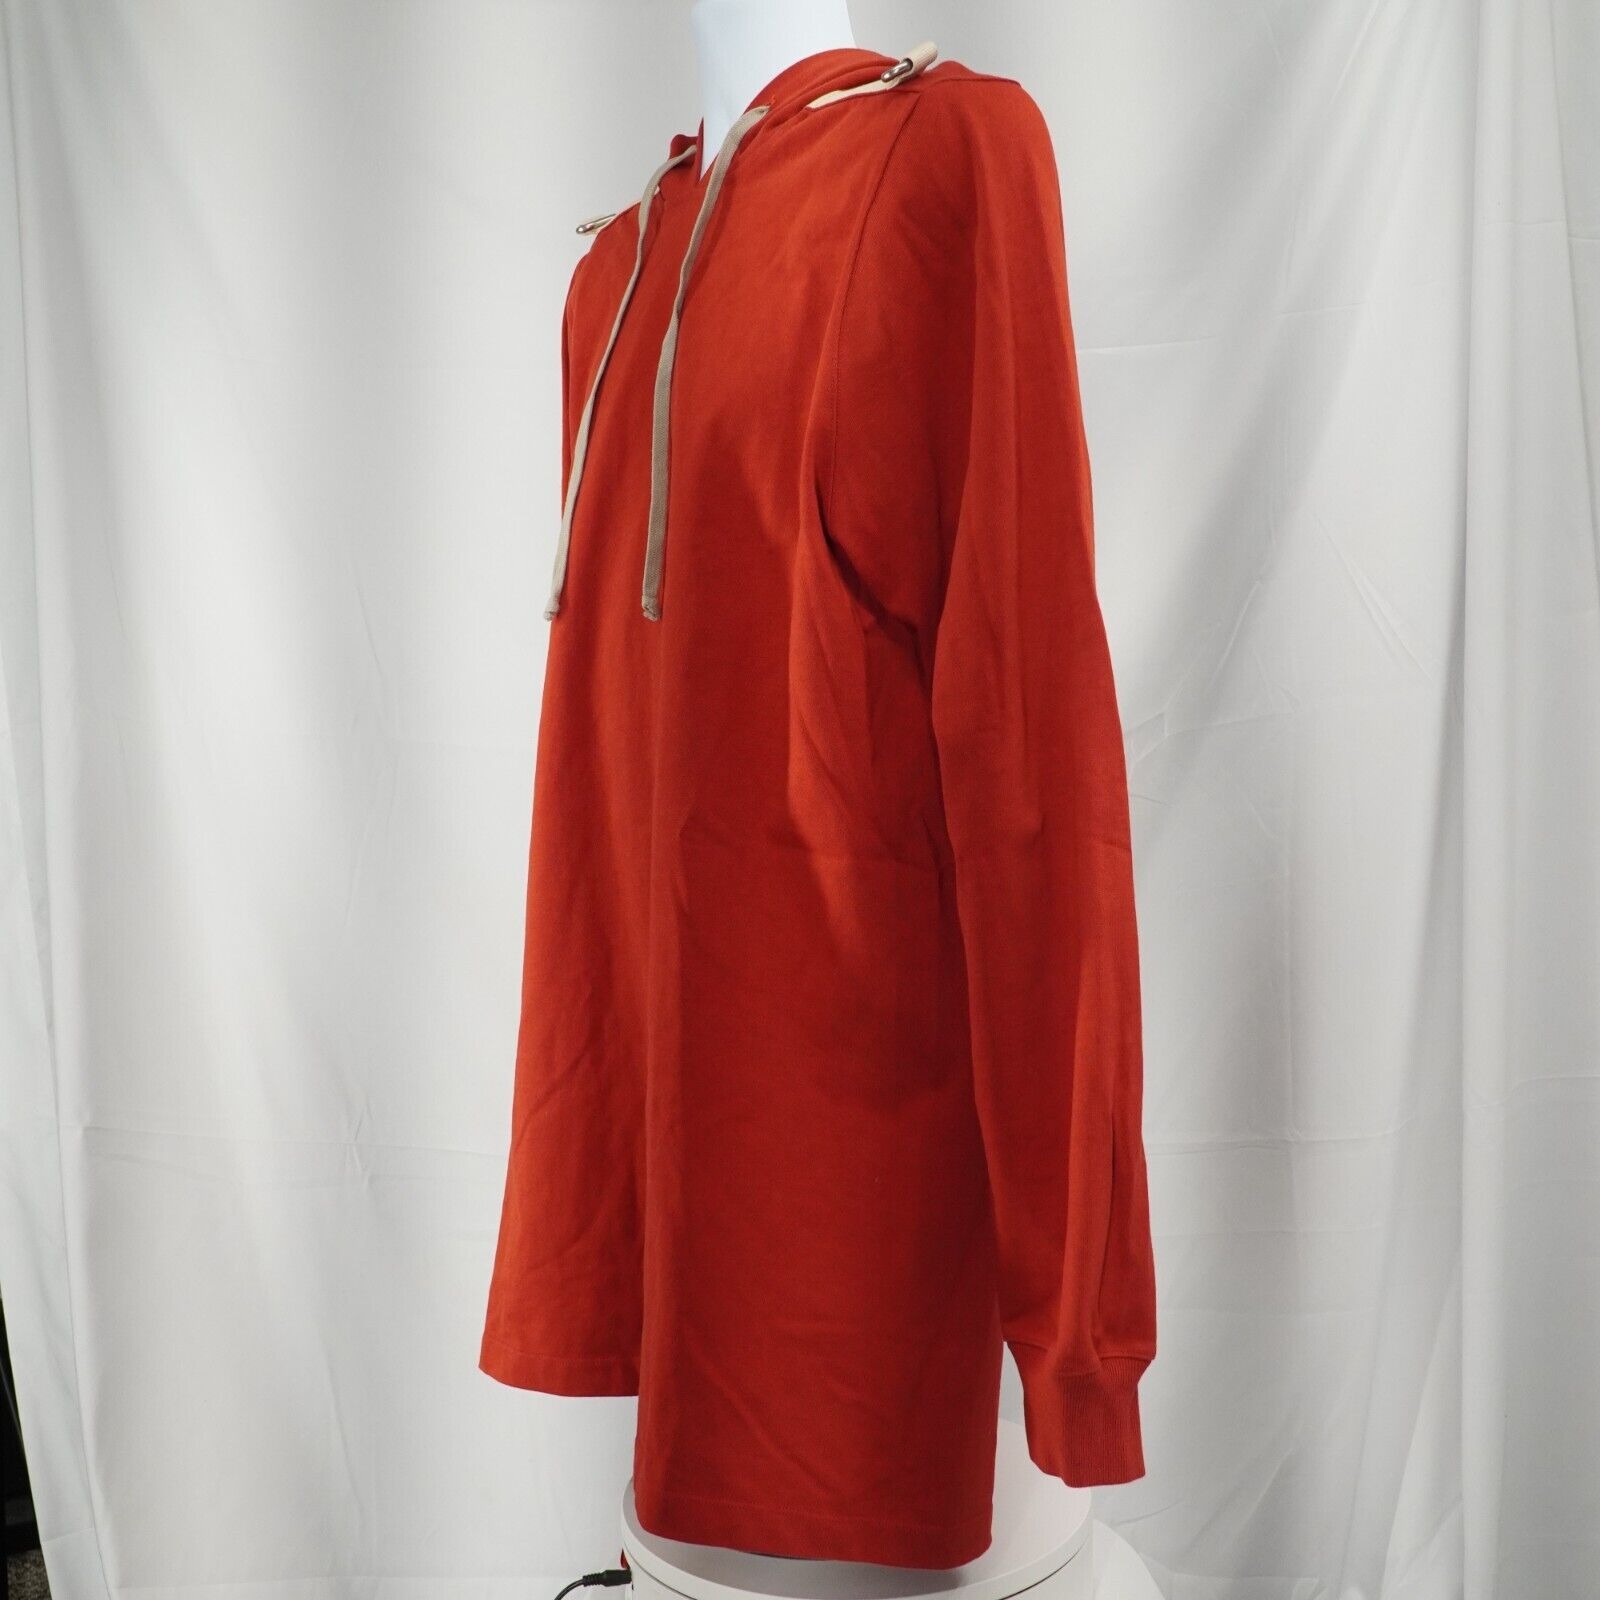 Knit Hoodie Sweater Longline Cardinal Red Natural D Rings - 6